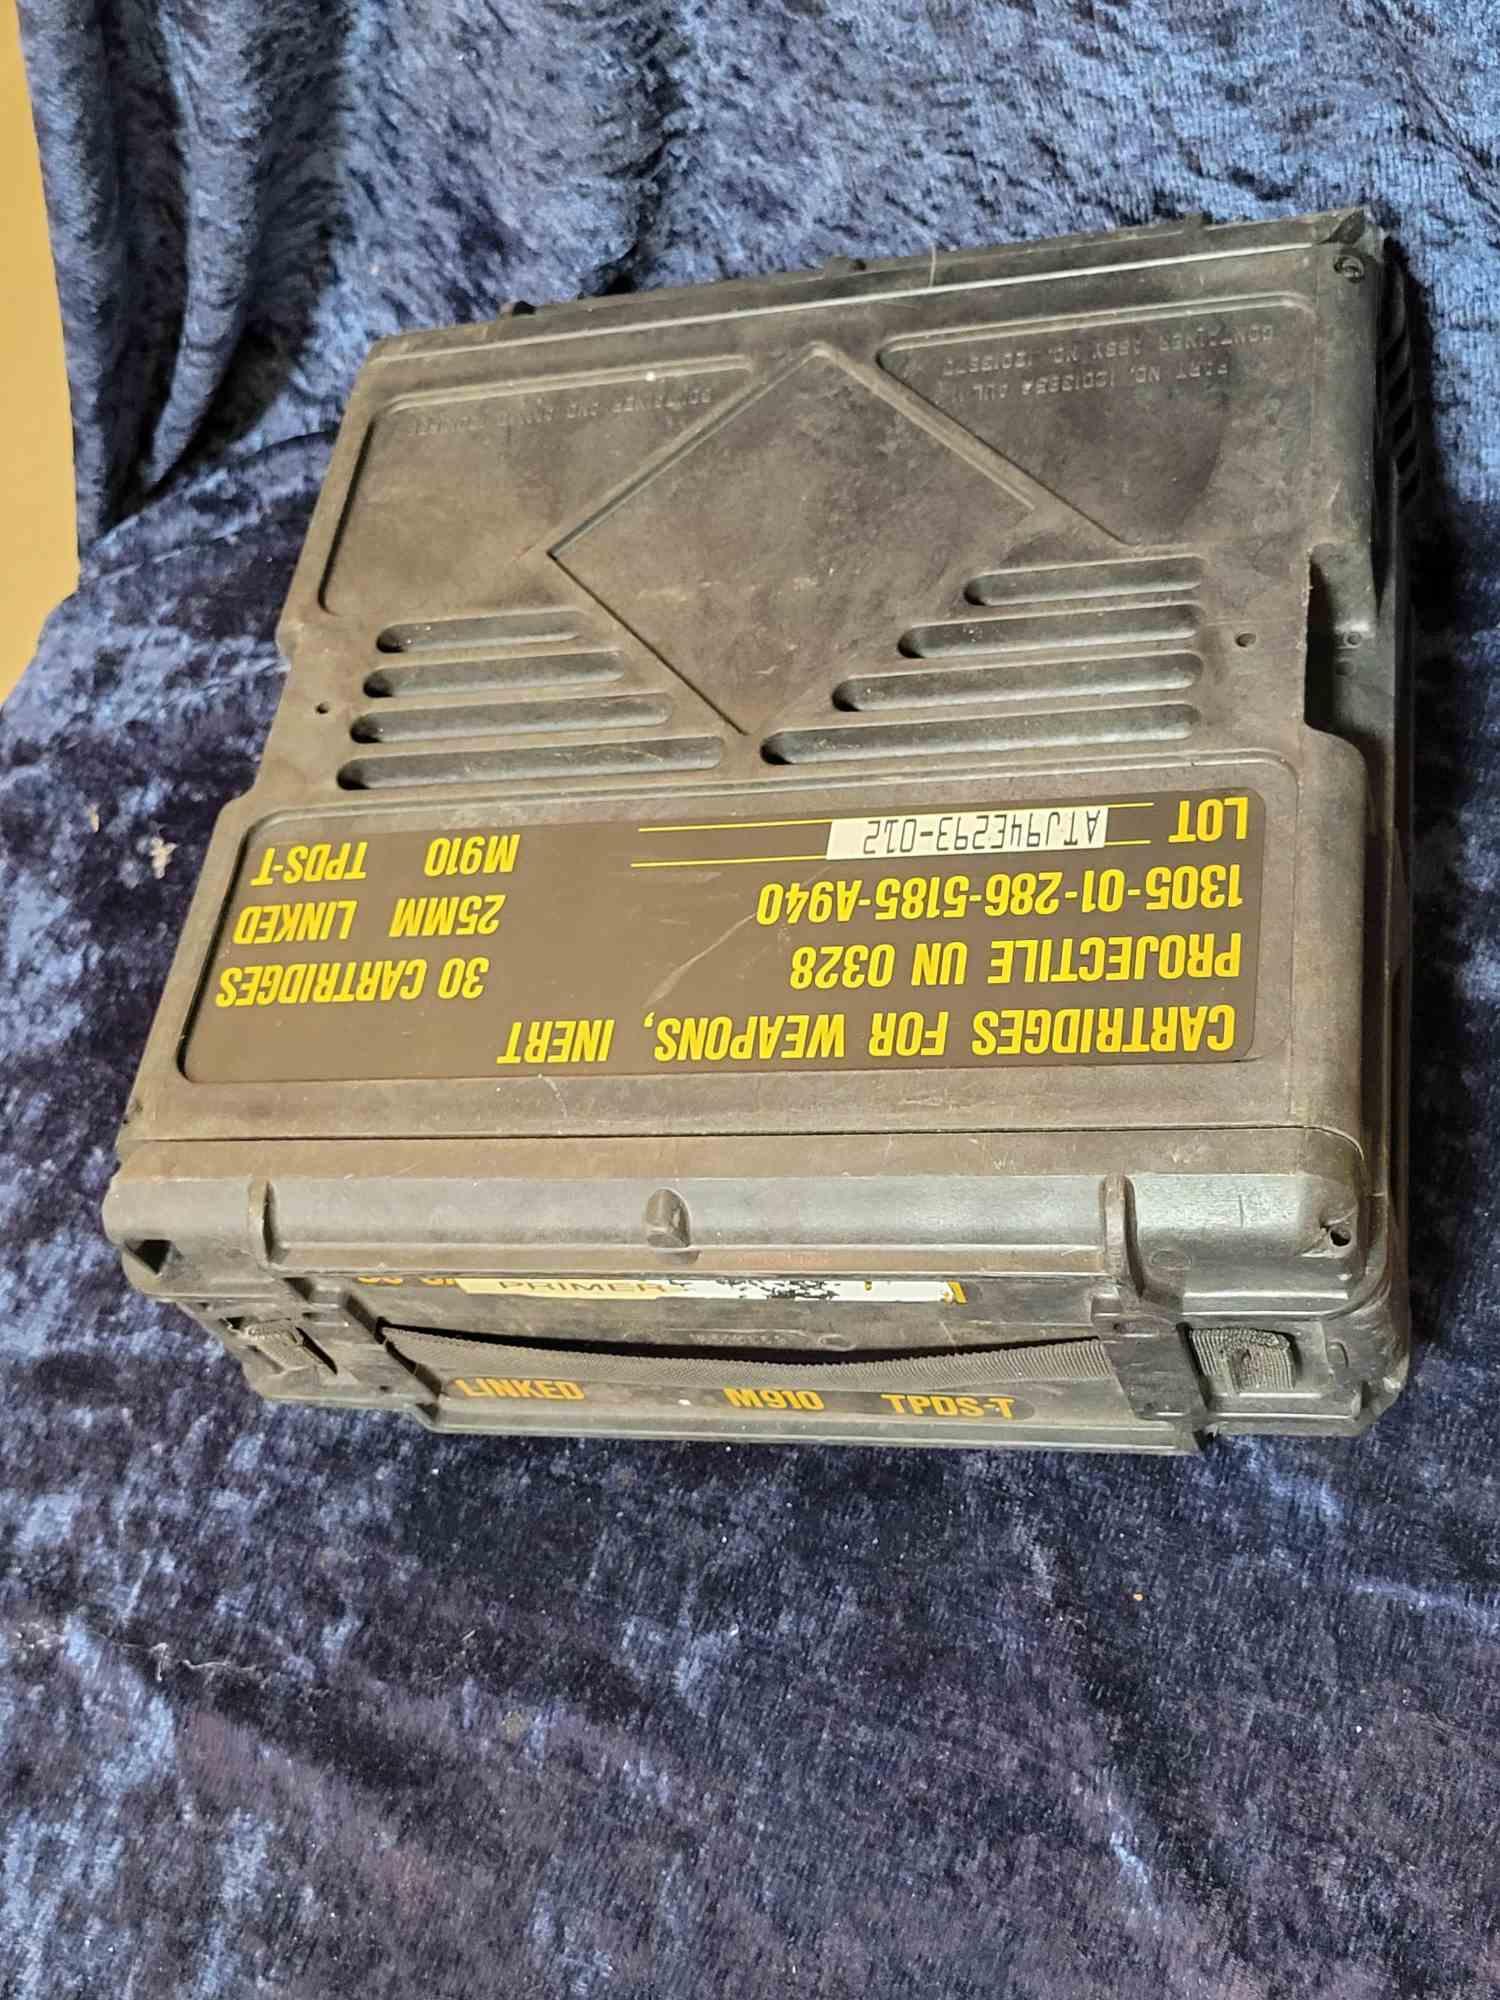 PAIR OF MILITARY AMMO BOXES FOR 25MM CARTRIDGES